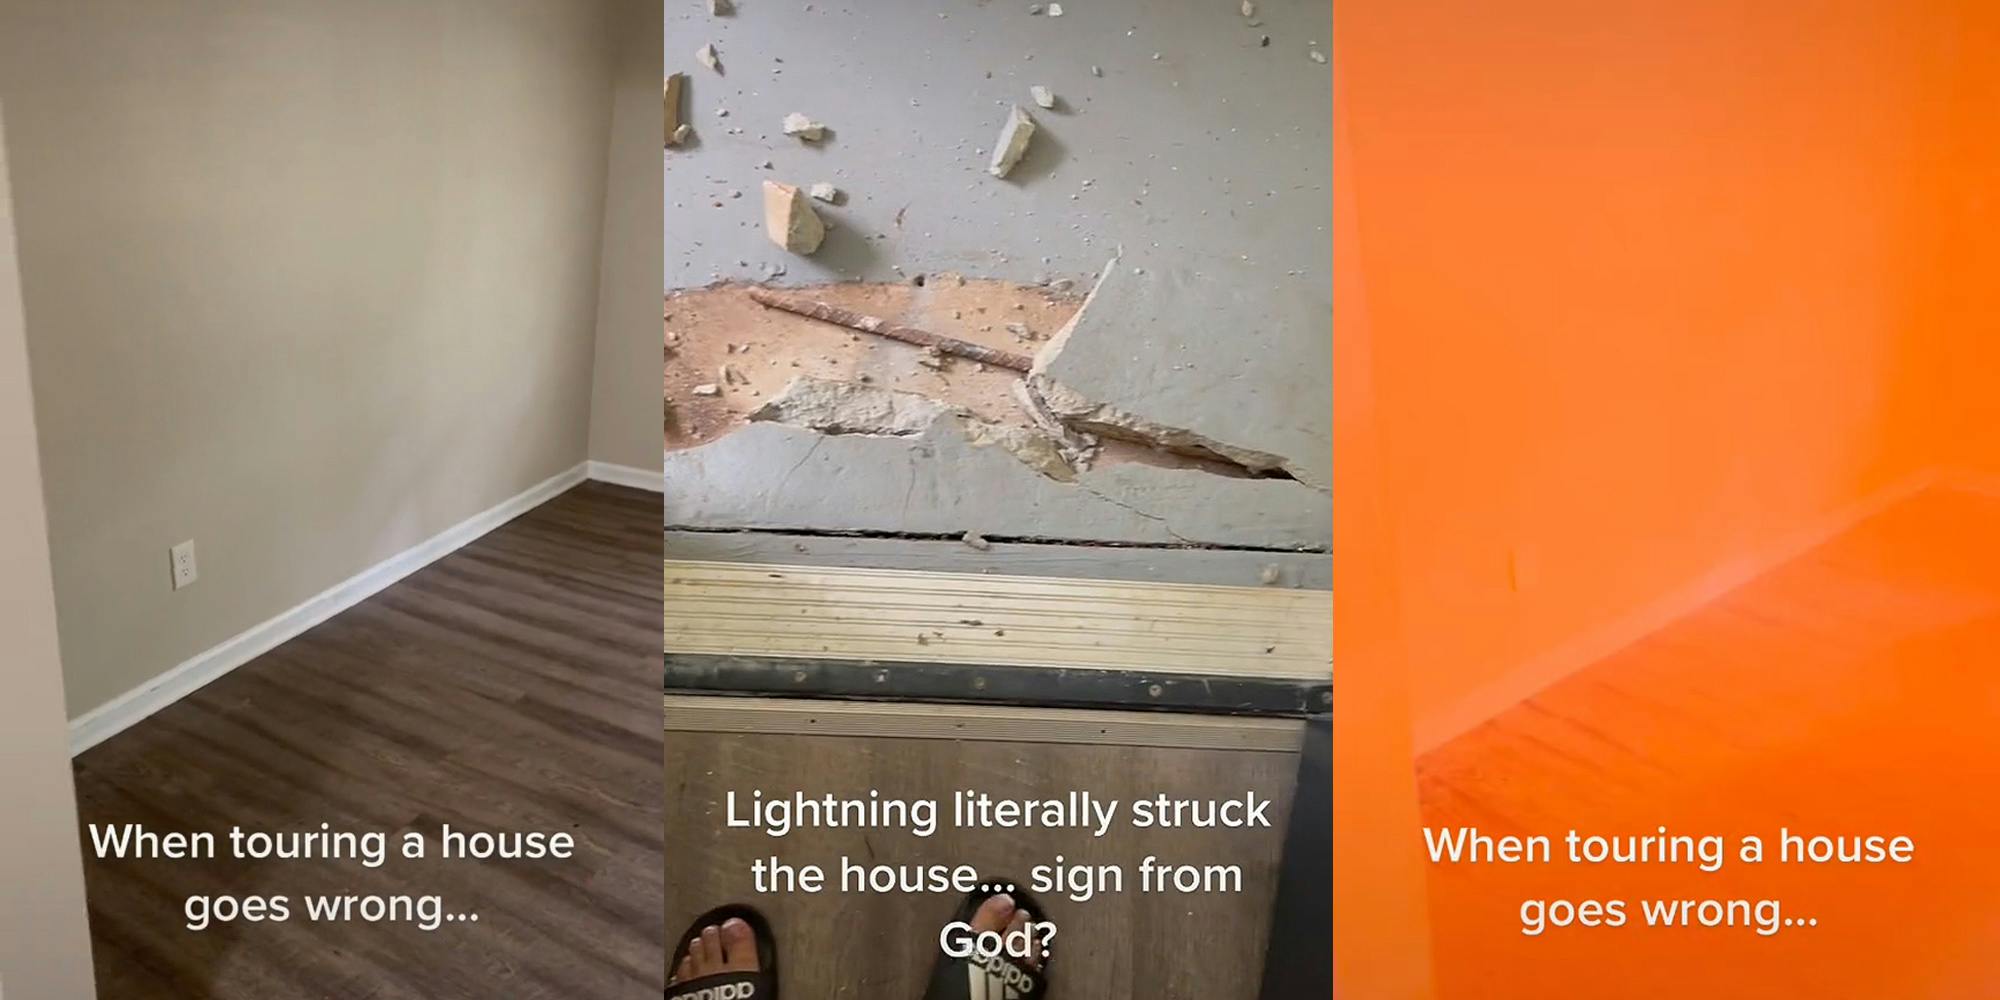 house walls floor and outlet caption "When house touring goes wrong..." (l) woman revealing damage from lightning striking outside of house caption "Lightning literally struck the house... sign from God?" (c) house walls floor and outlet when lightning strikes caption "When house touring goes wrong..." (r)